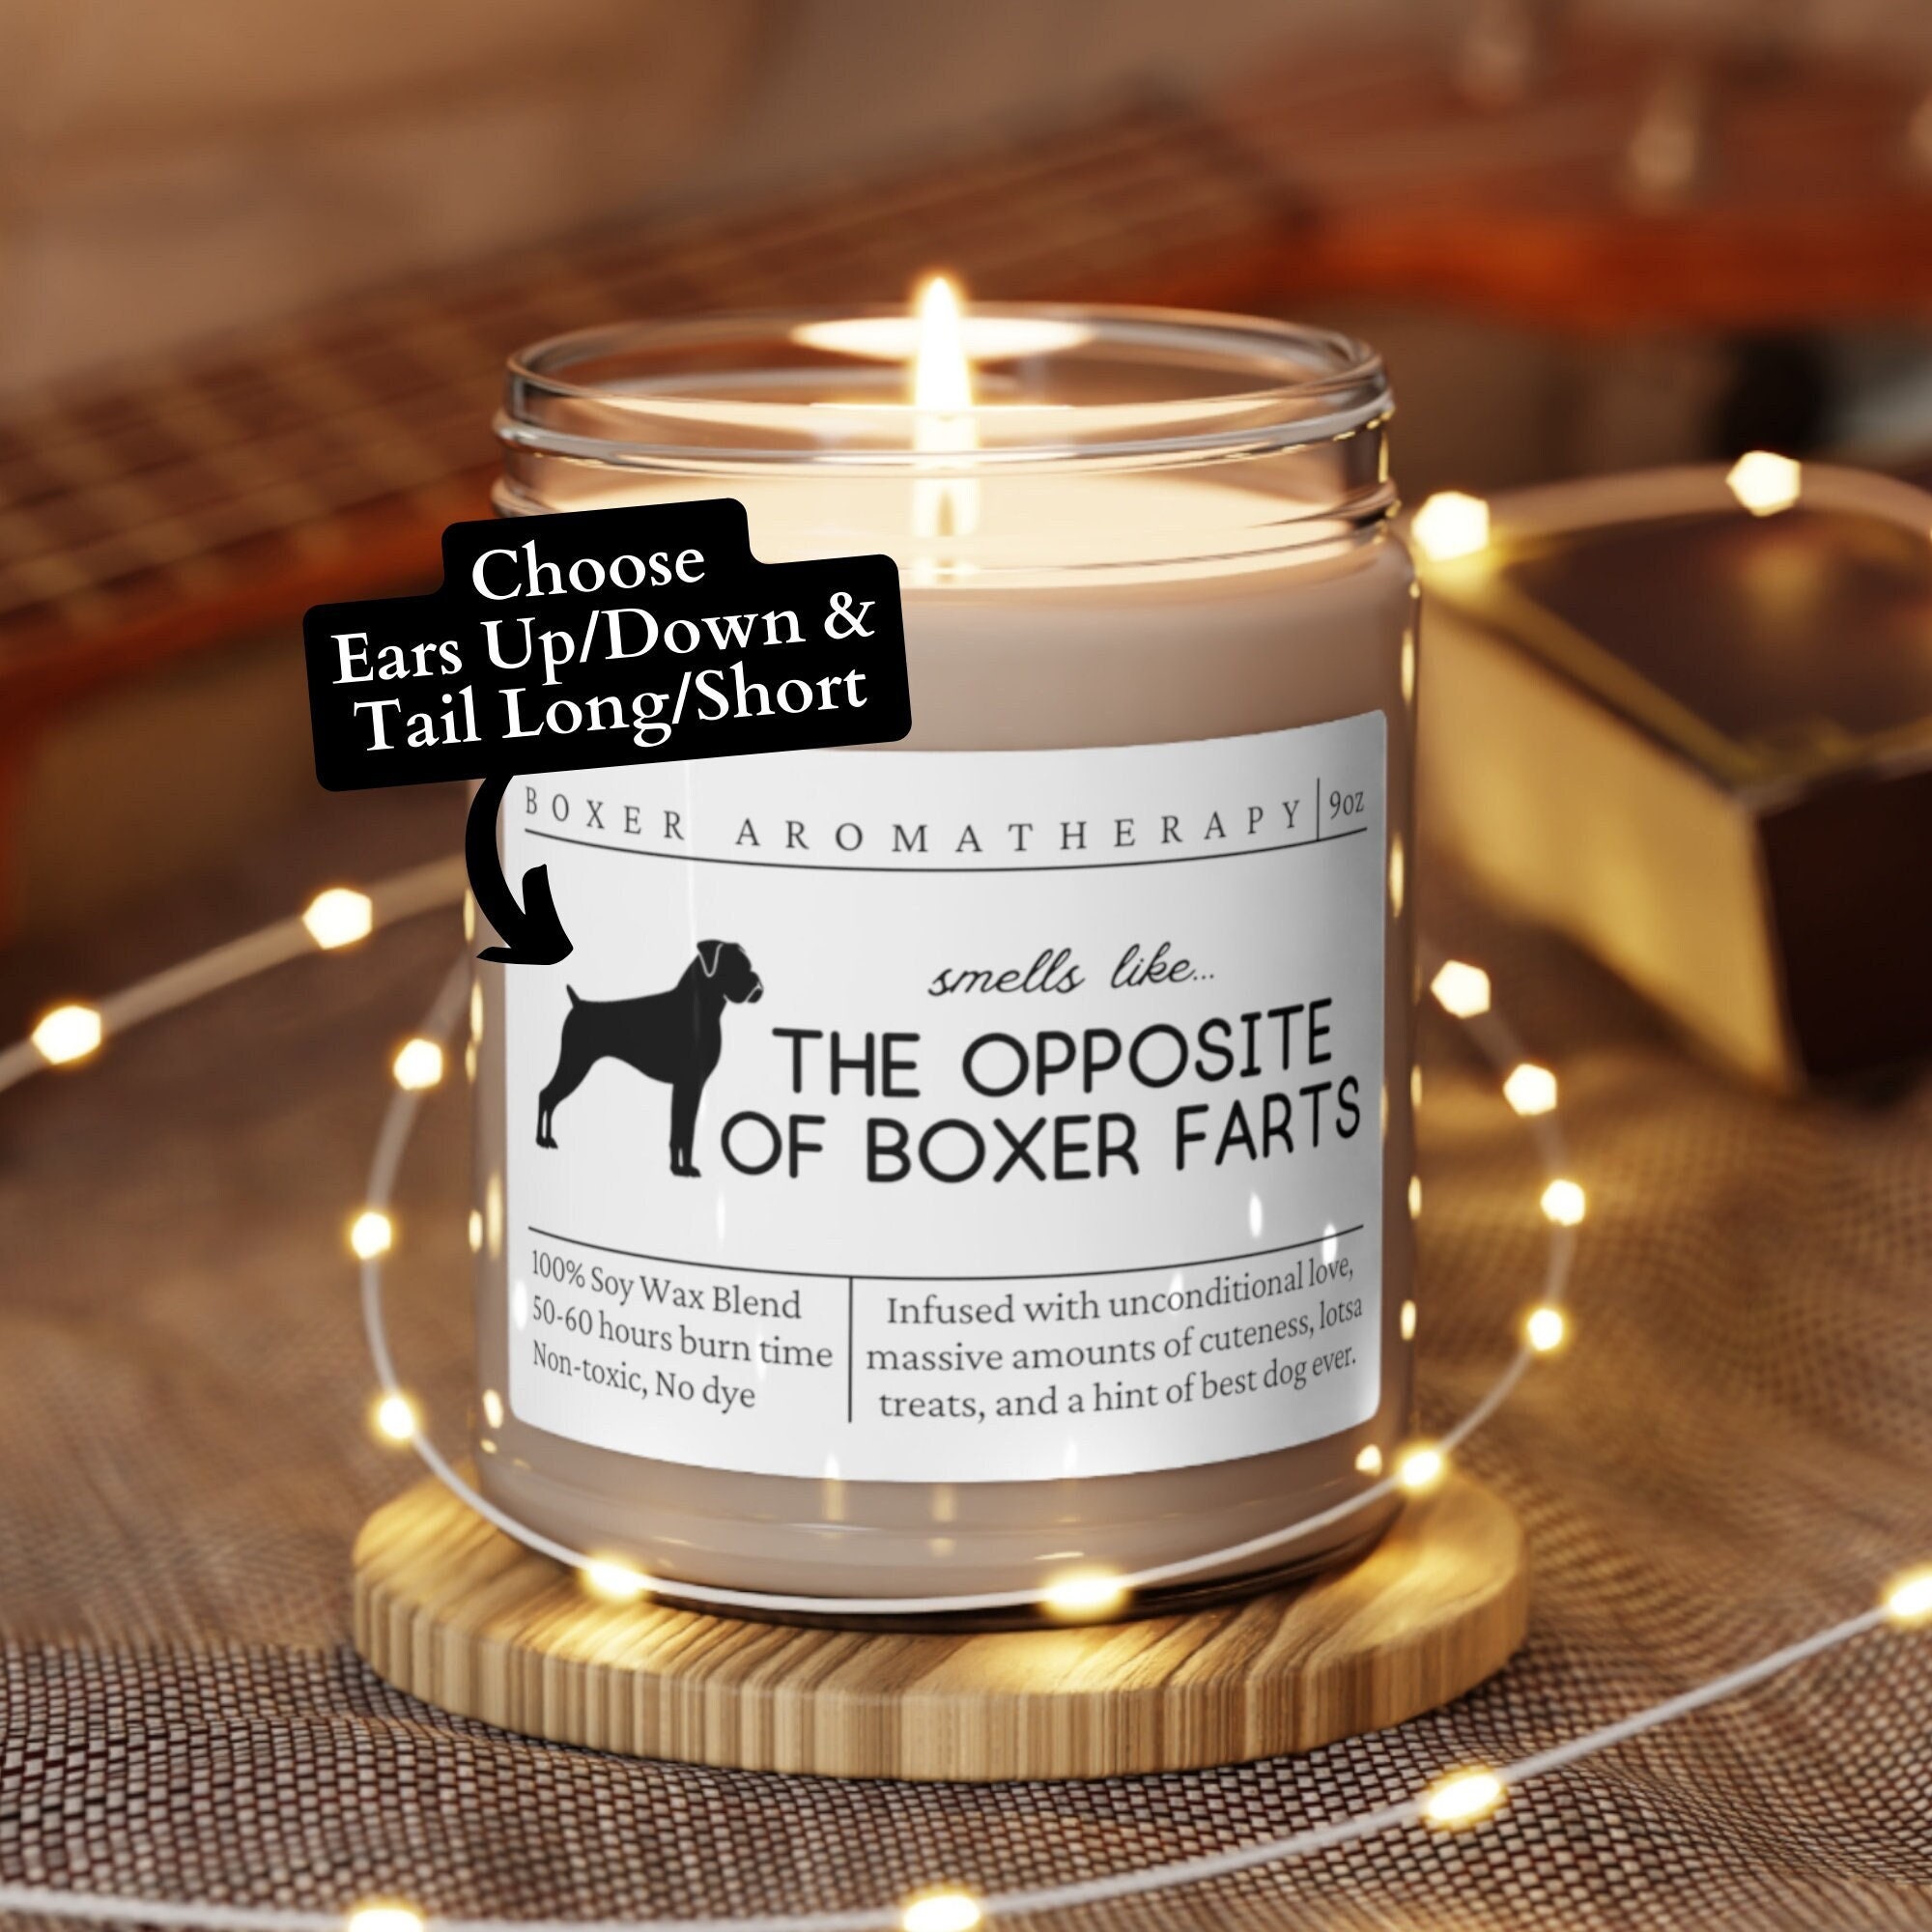 Dog Mom Candle – The Good Candle